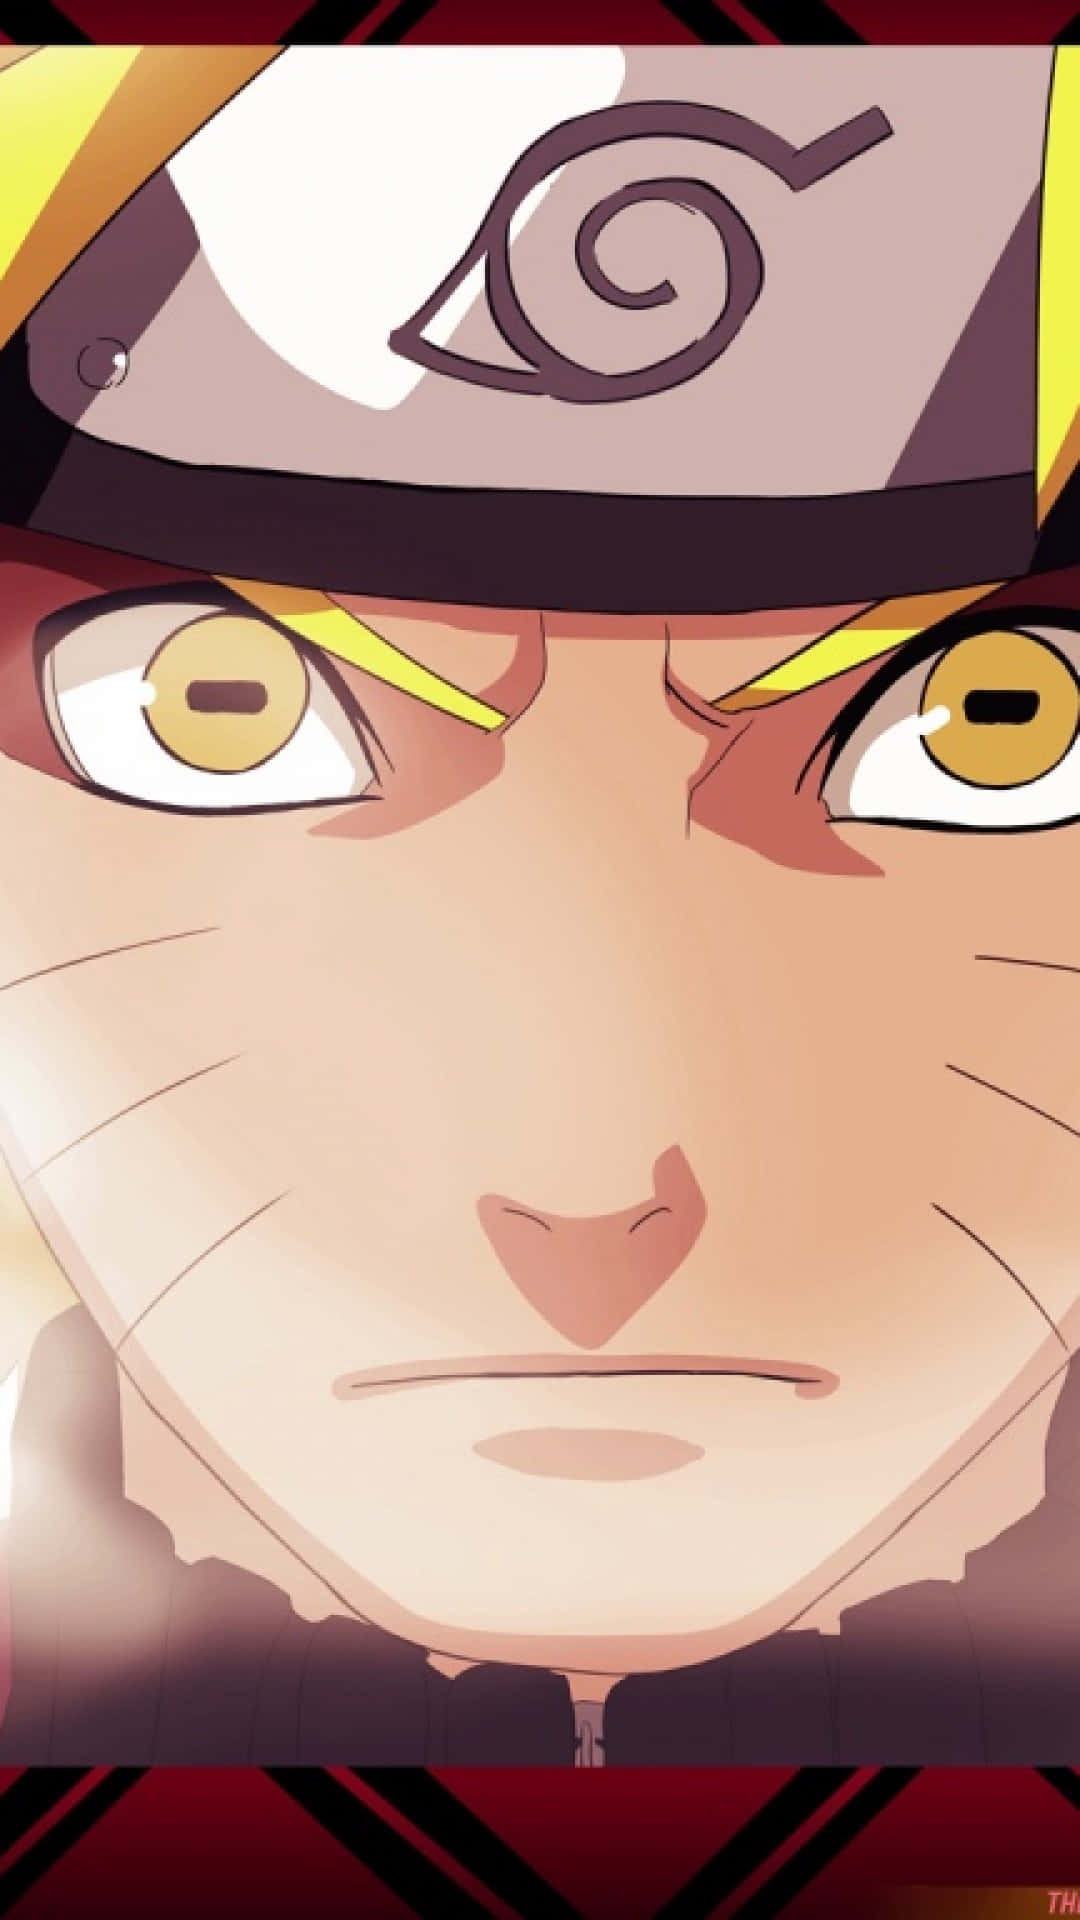 Get ready for action with the Naruto Shippuden Iphone Wallpaper